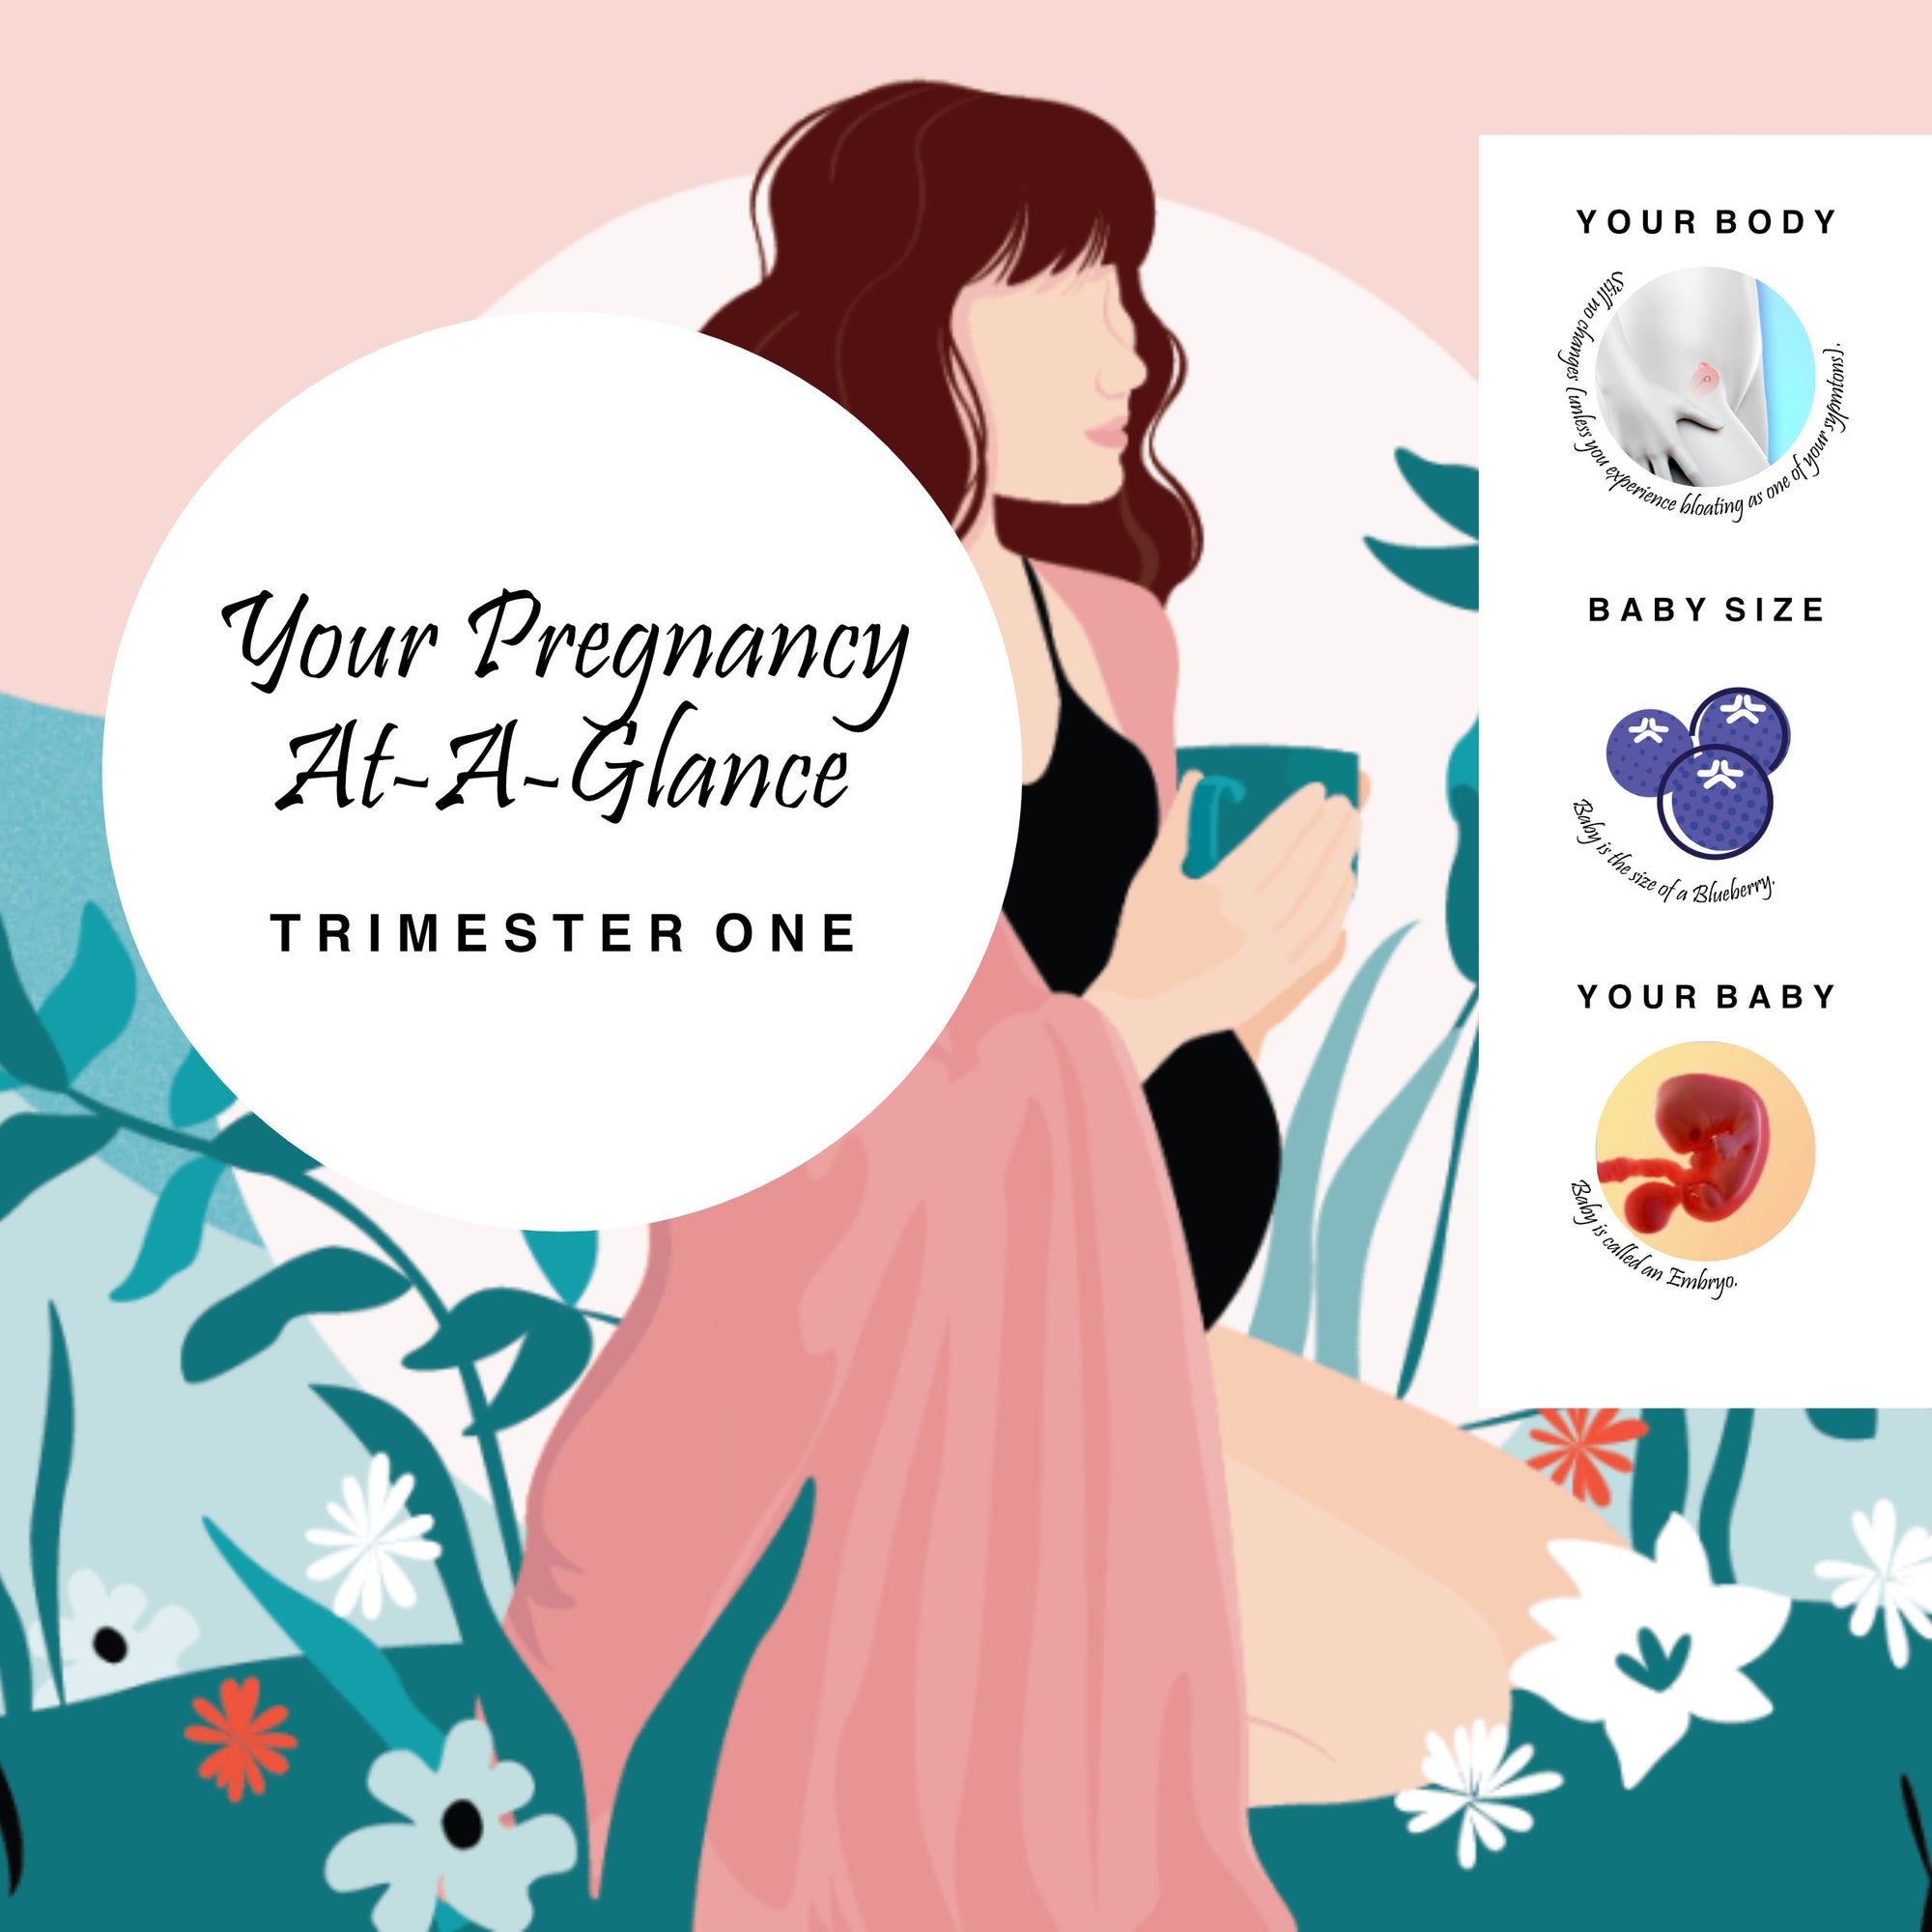 Image for article: Your Pregnancy At-A-Glance Trimester One